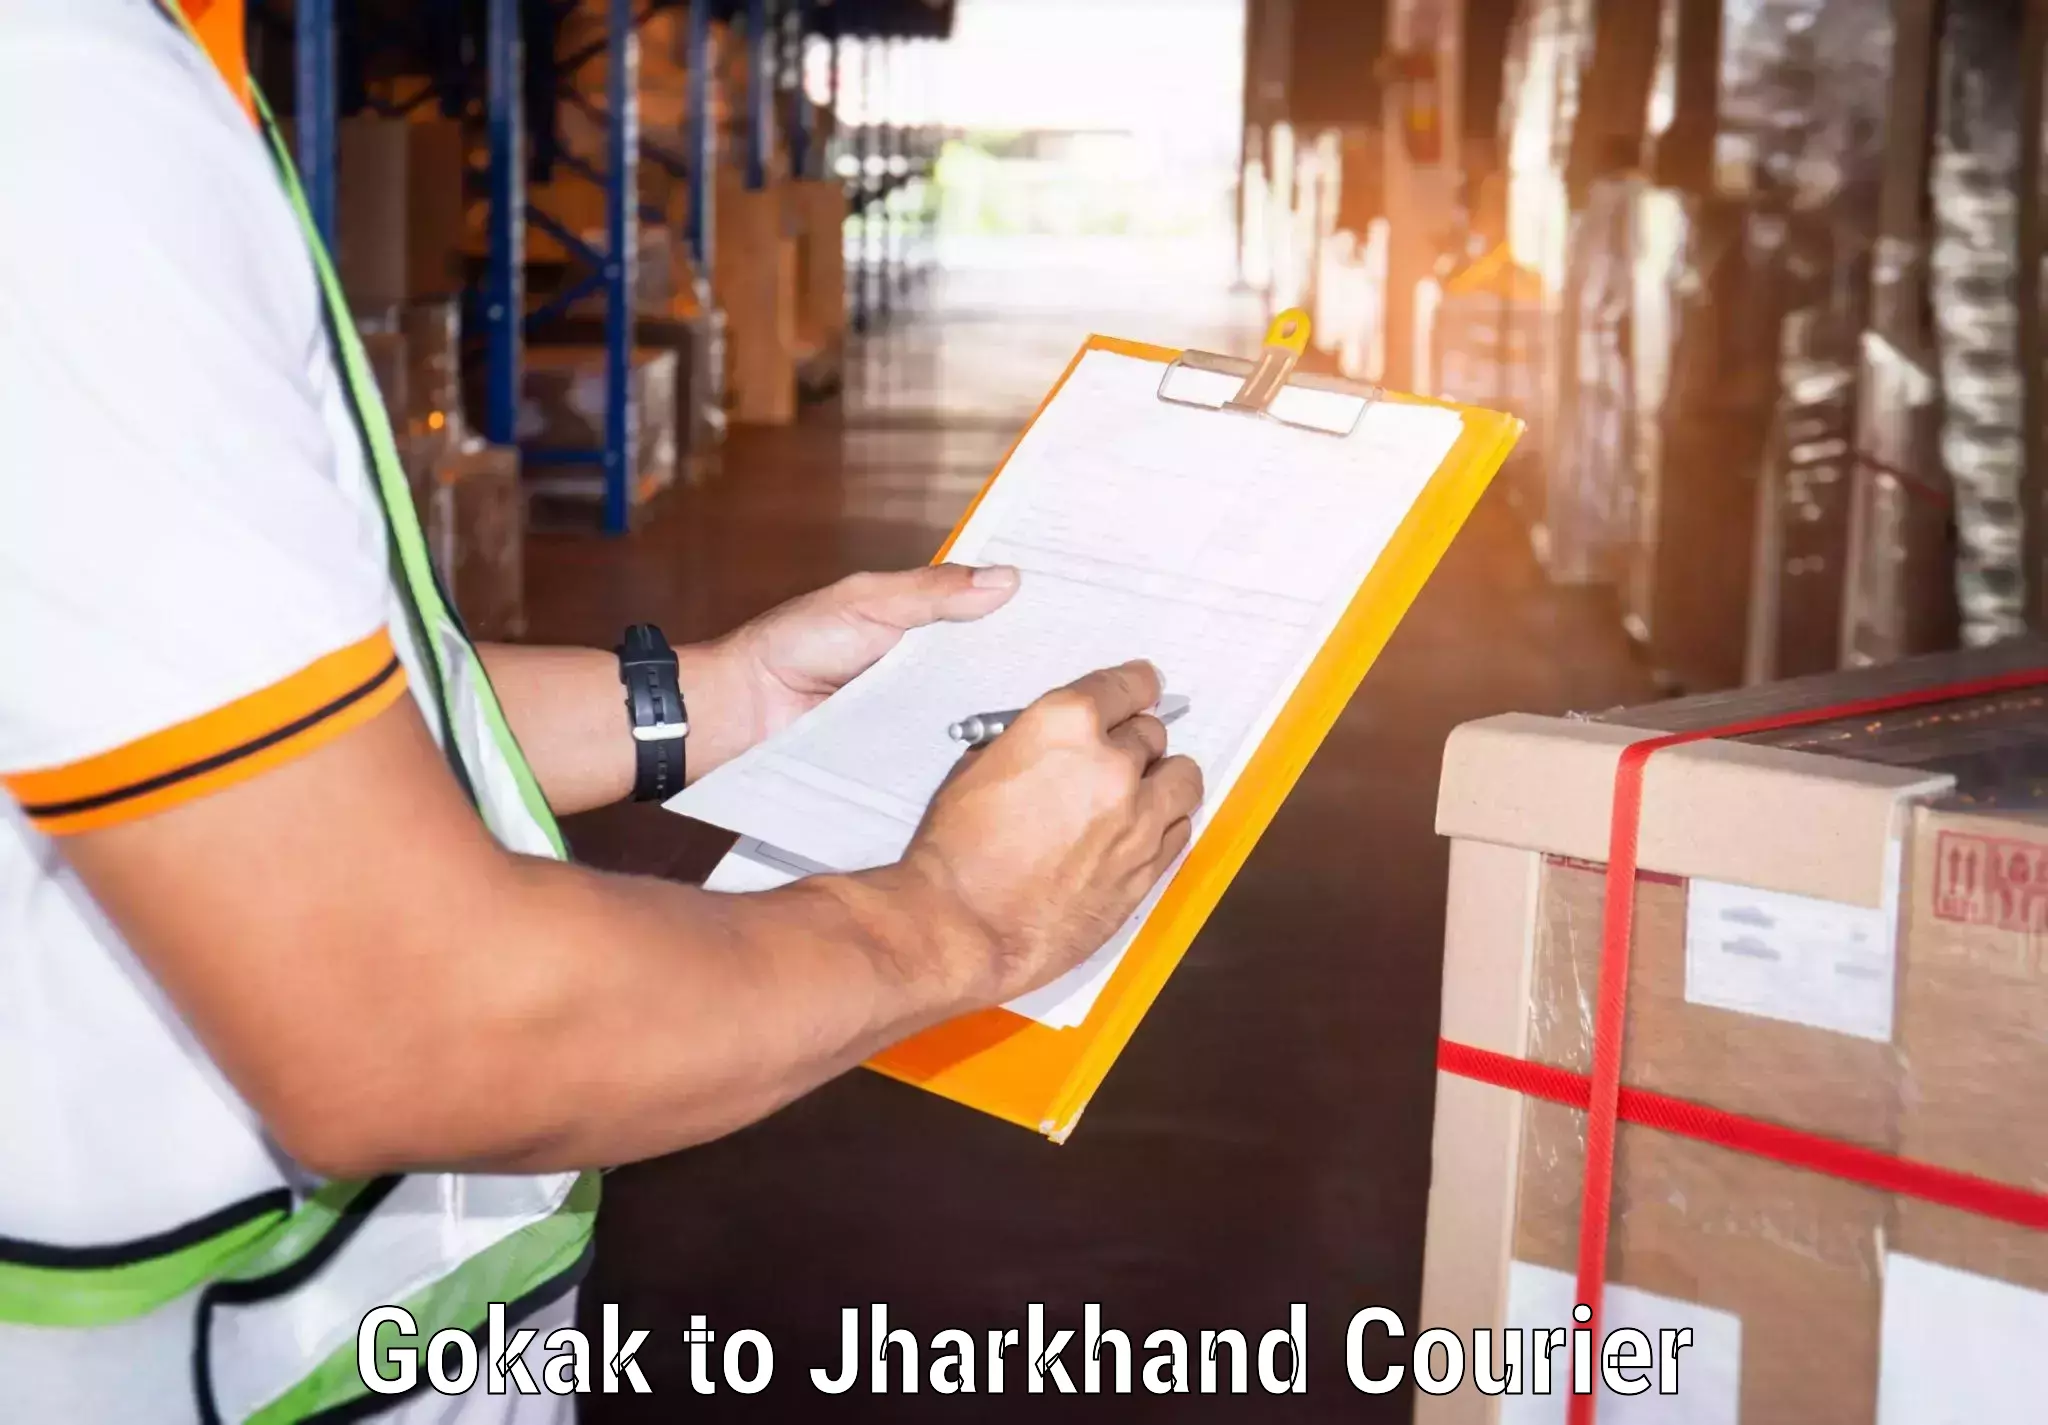 Advanced tracking systems Gokak to Jharkhand